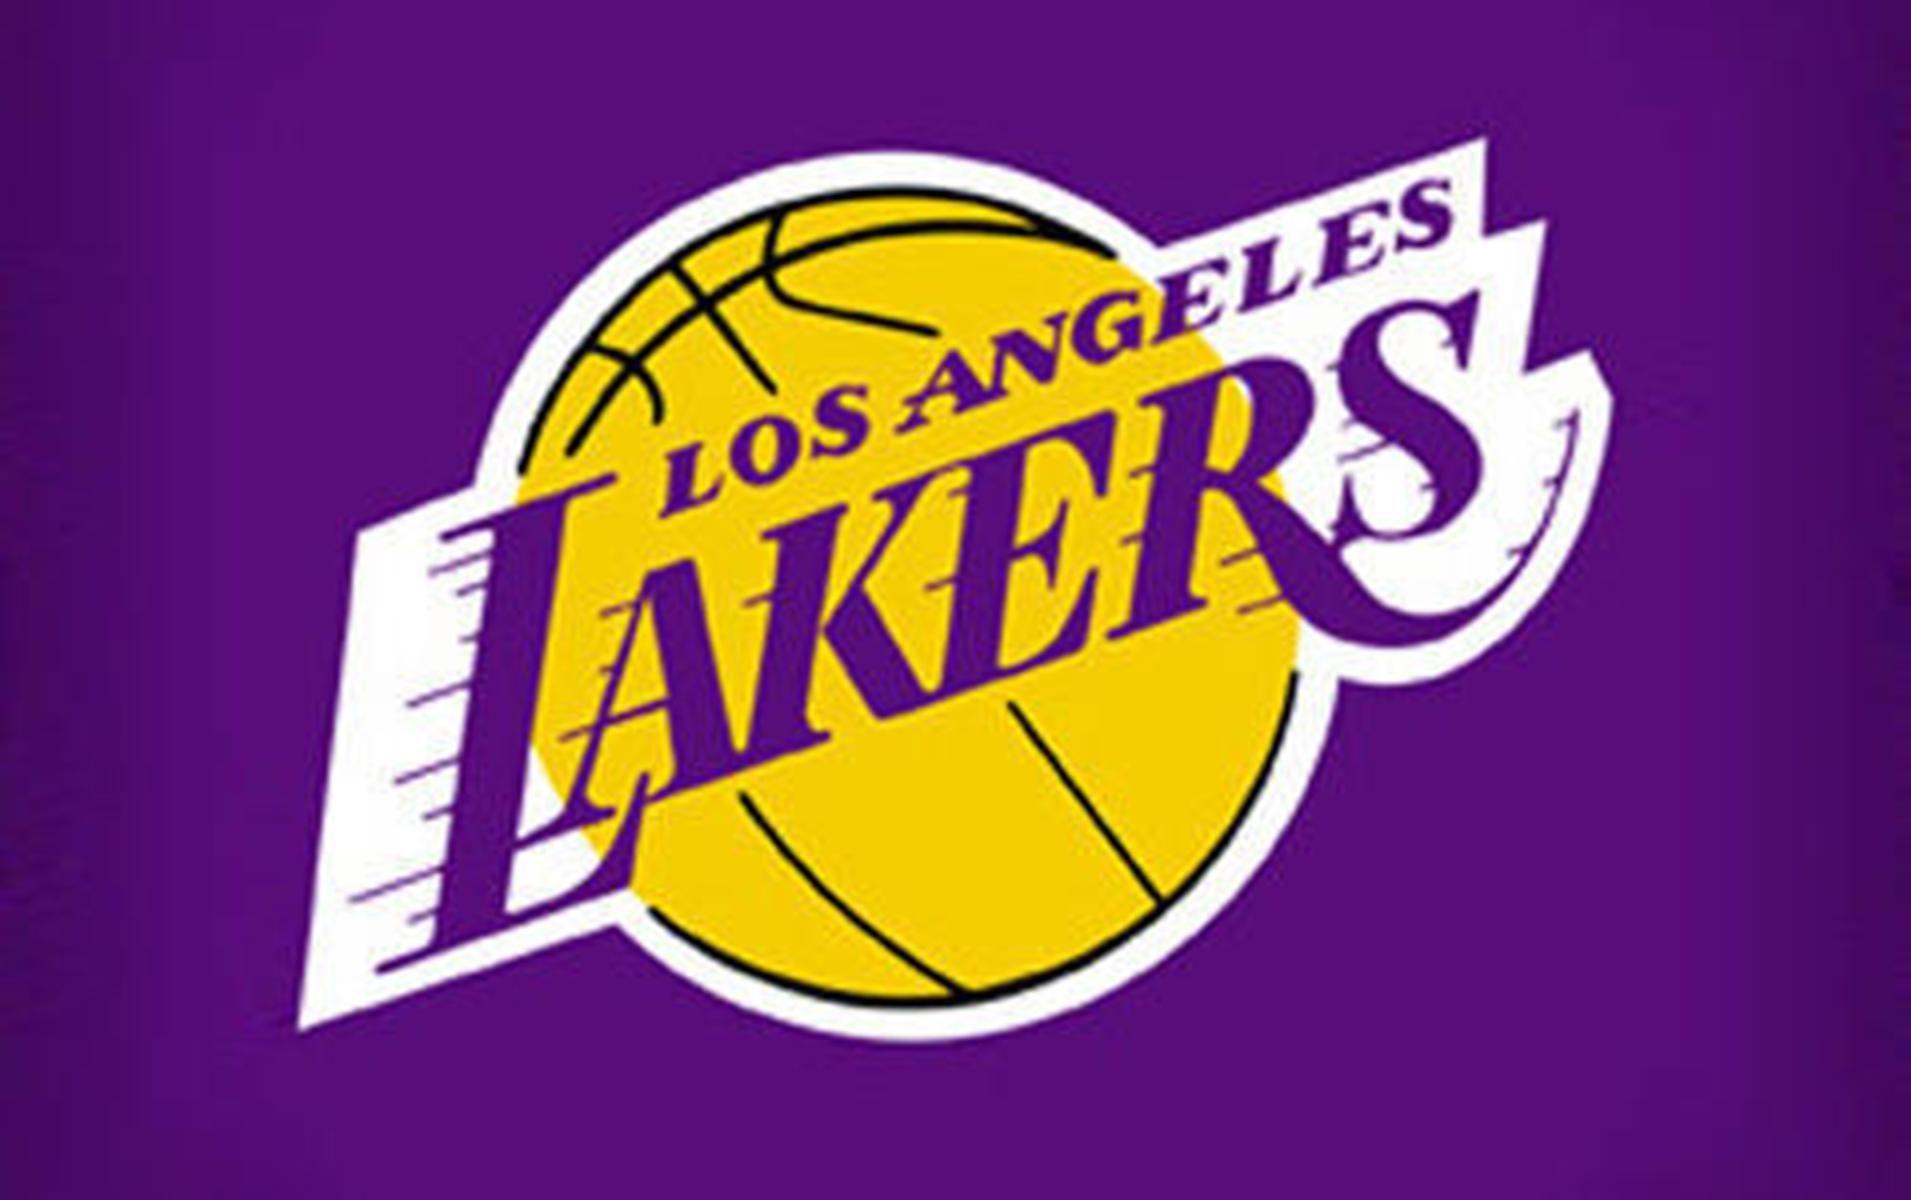 Los Angeles Lakers Wallpapers Top Free Los Angeles Lakers Backgrounds